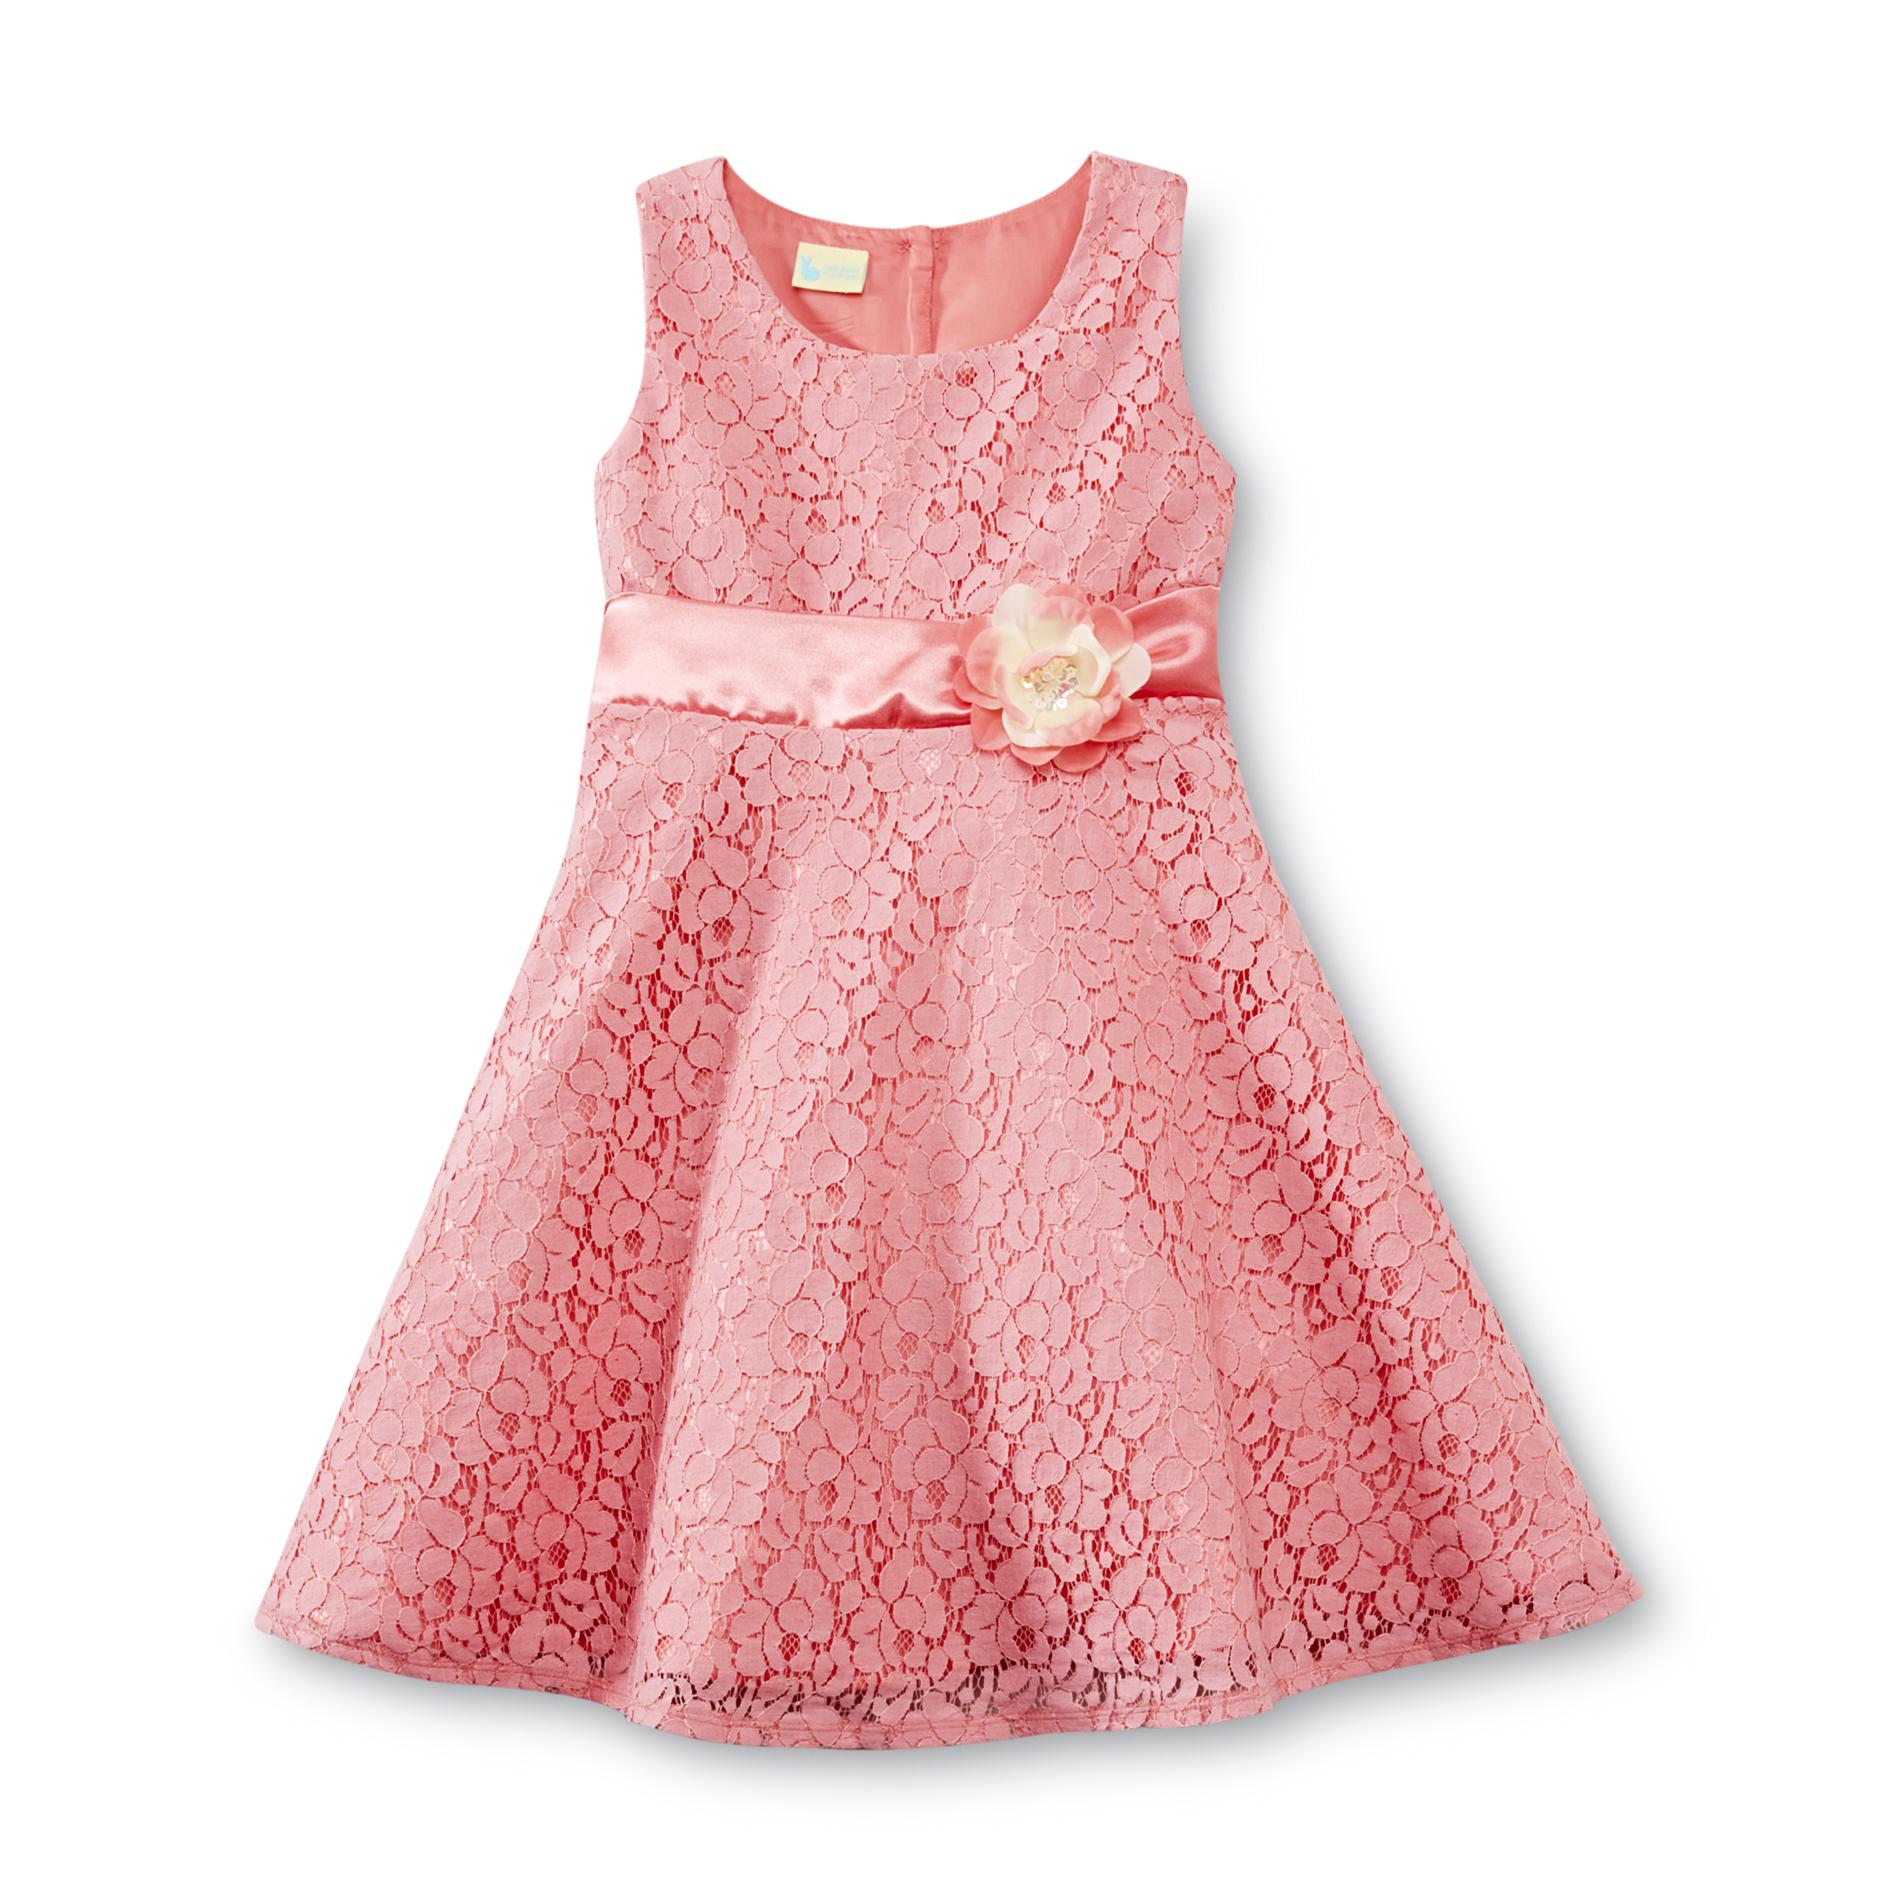 $12 Girls’ Easter Dresses + FREE Pickup | Get It in Time for Easter!